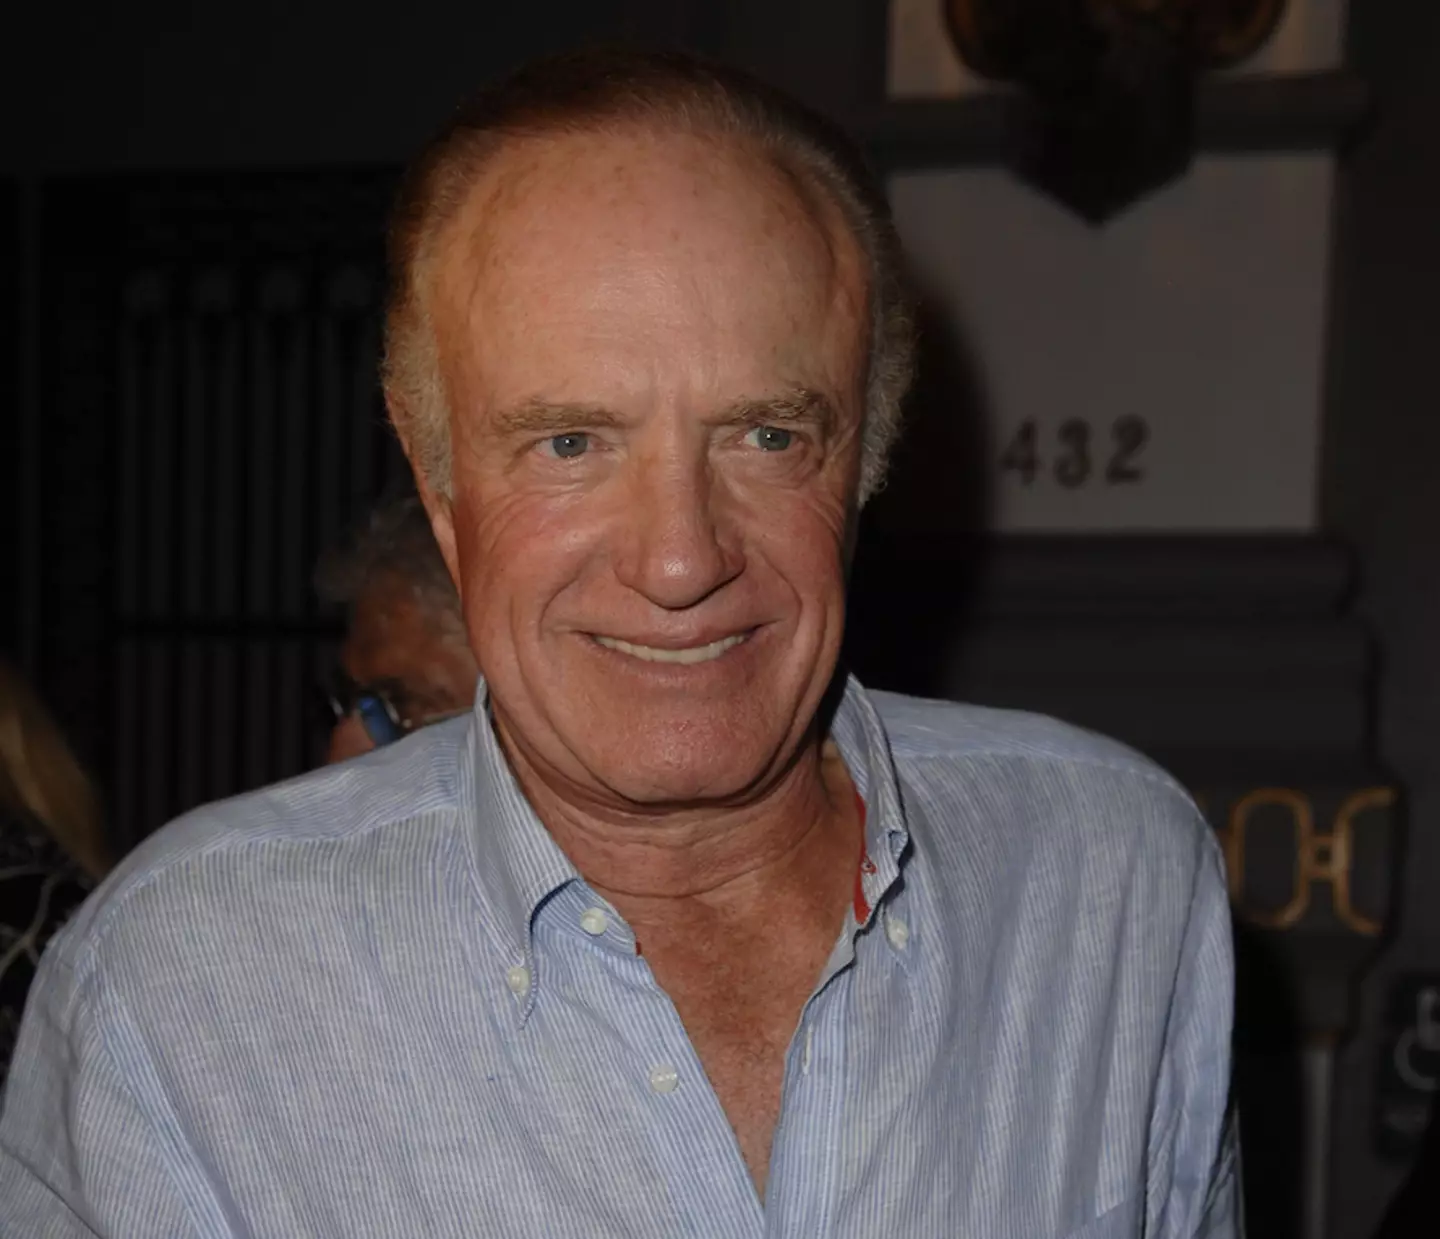 James Caan passed away at the age of 82.